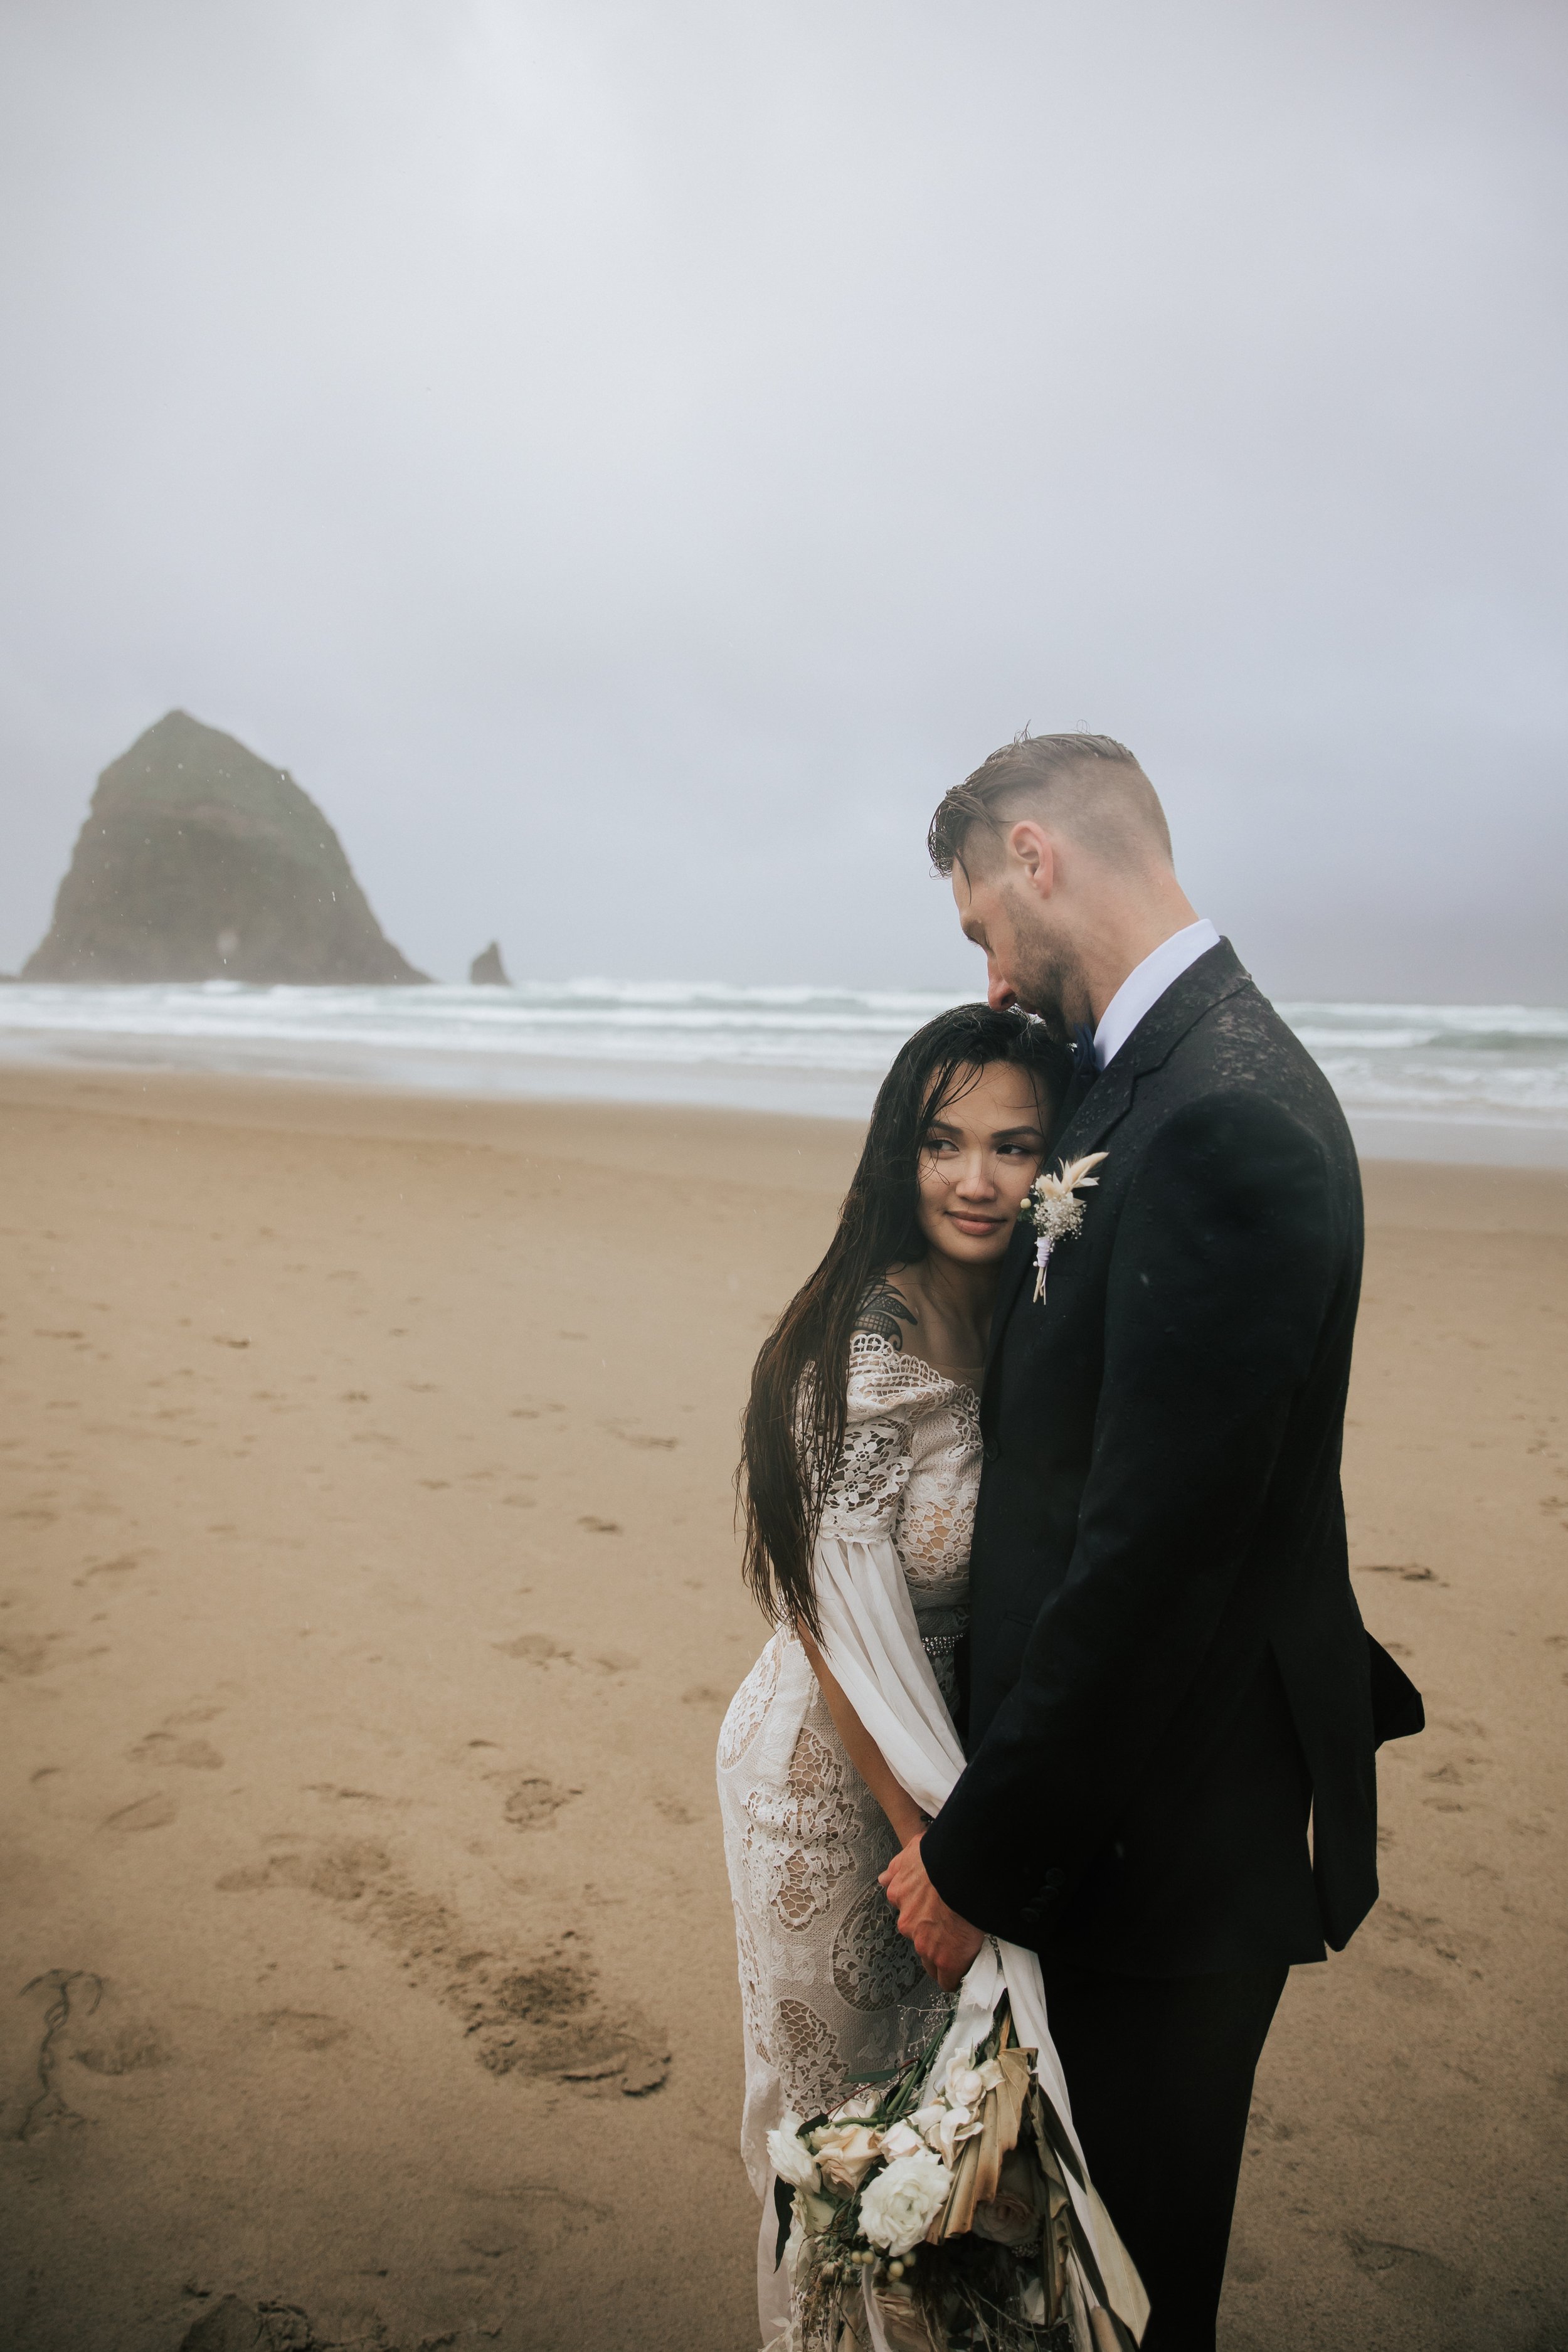  Bride and groom stand close together on cannon beach near seaside oregon elopement photography in the pacific northwest by emily jenkins photo professional elopement pictures bohemian bride #pnw #pnwwedding #pnwelopement #cannonbeach #cannonbeachelo